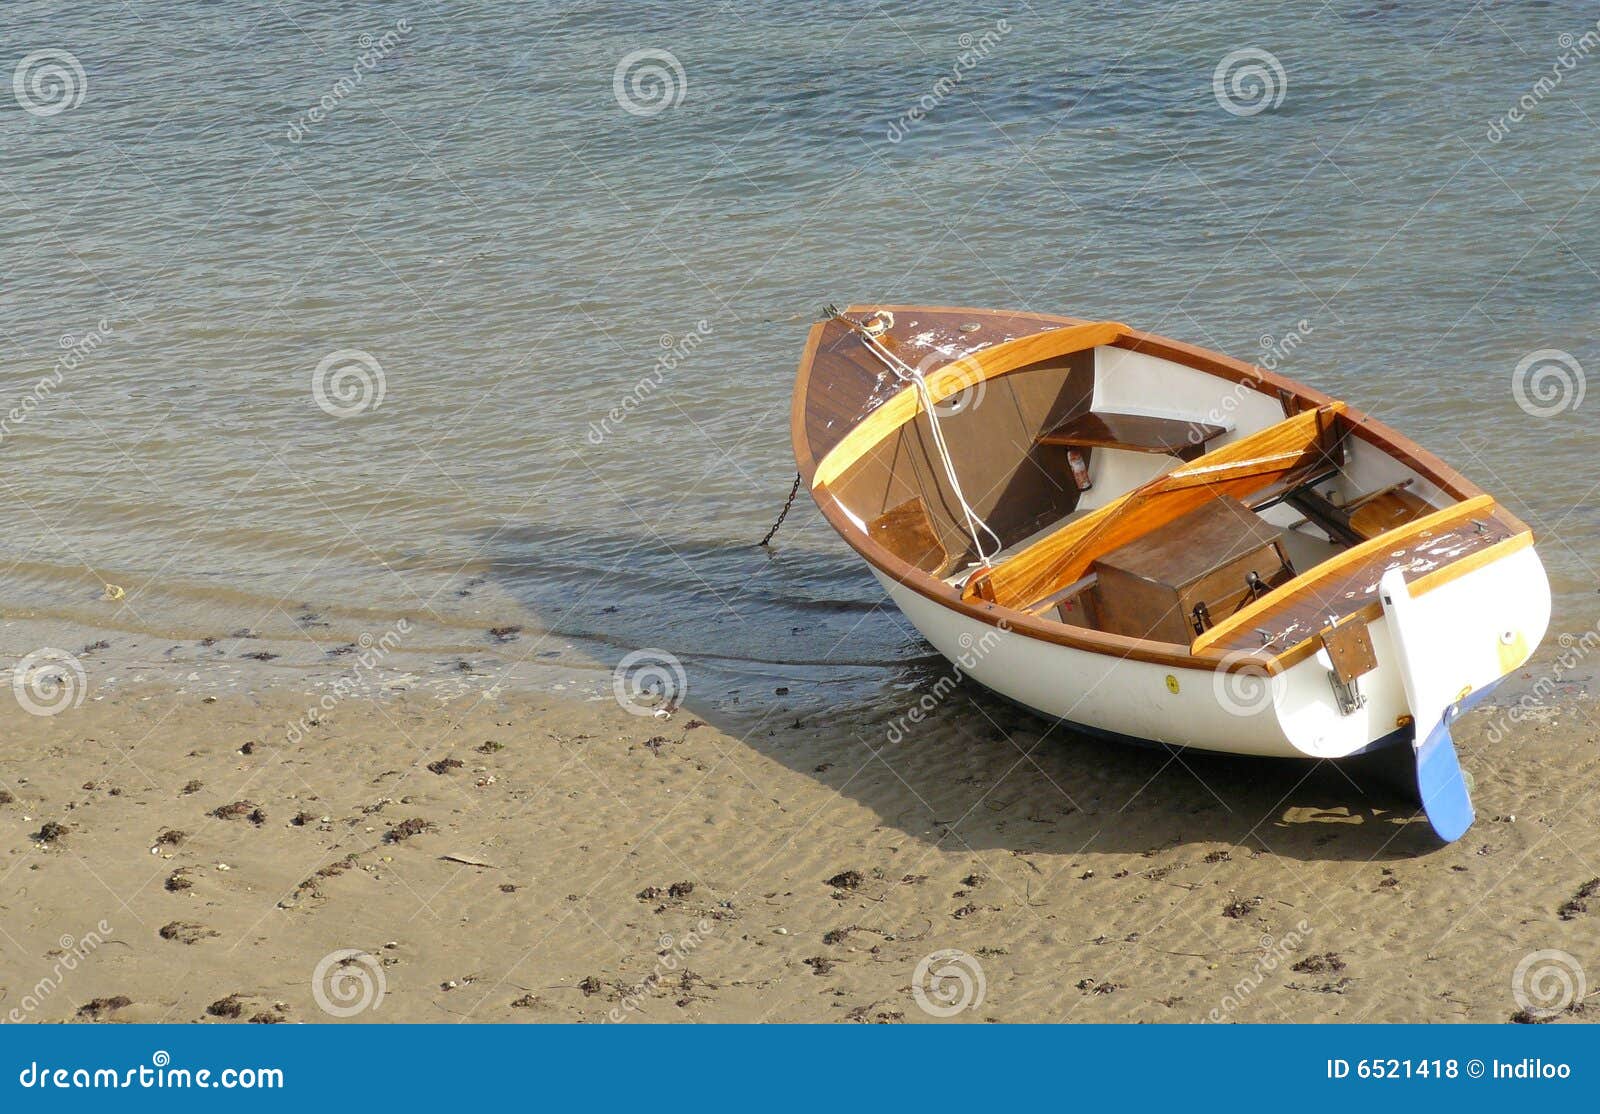 Wooden Boat Moored On Beach Royalty Free Stock Photos ...